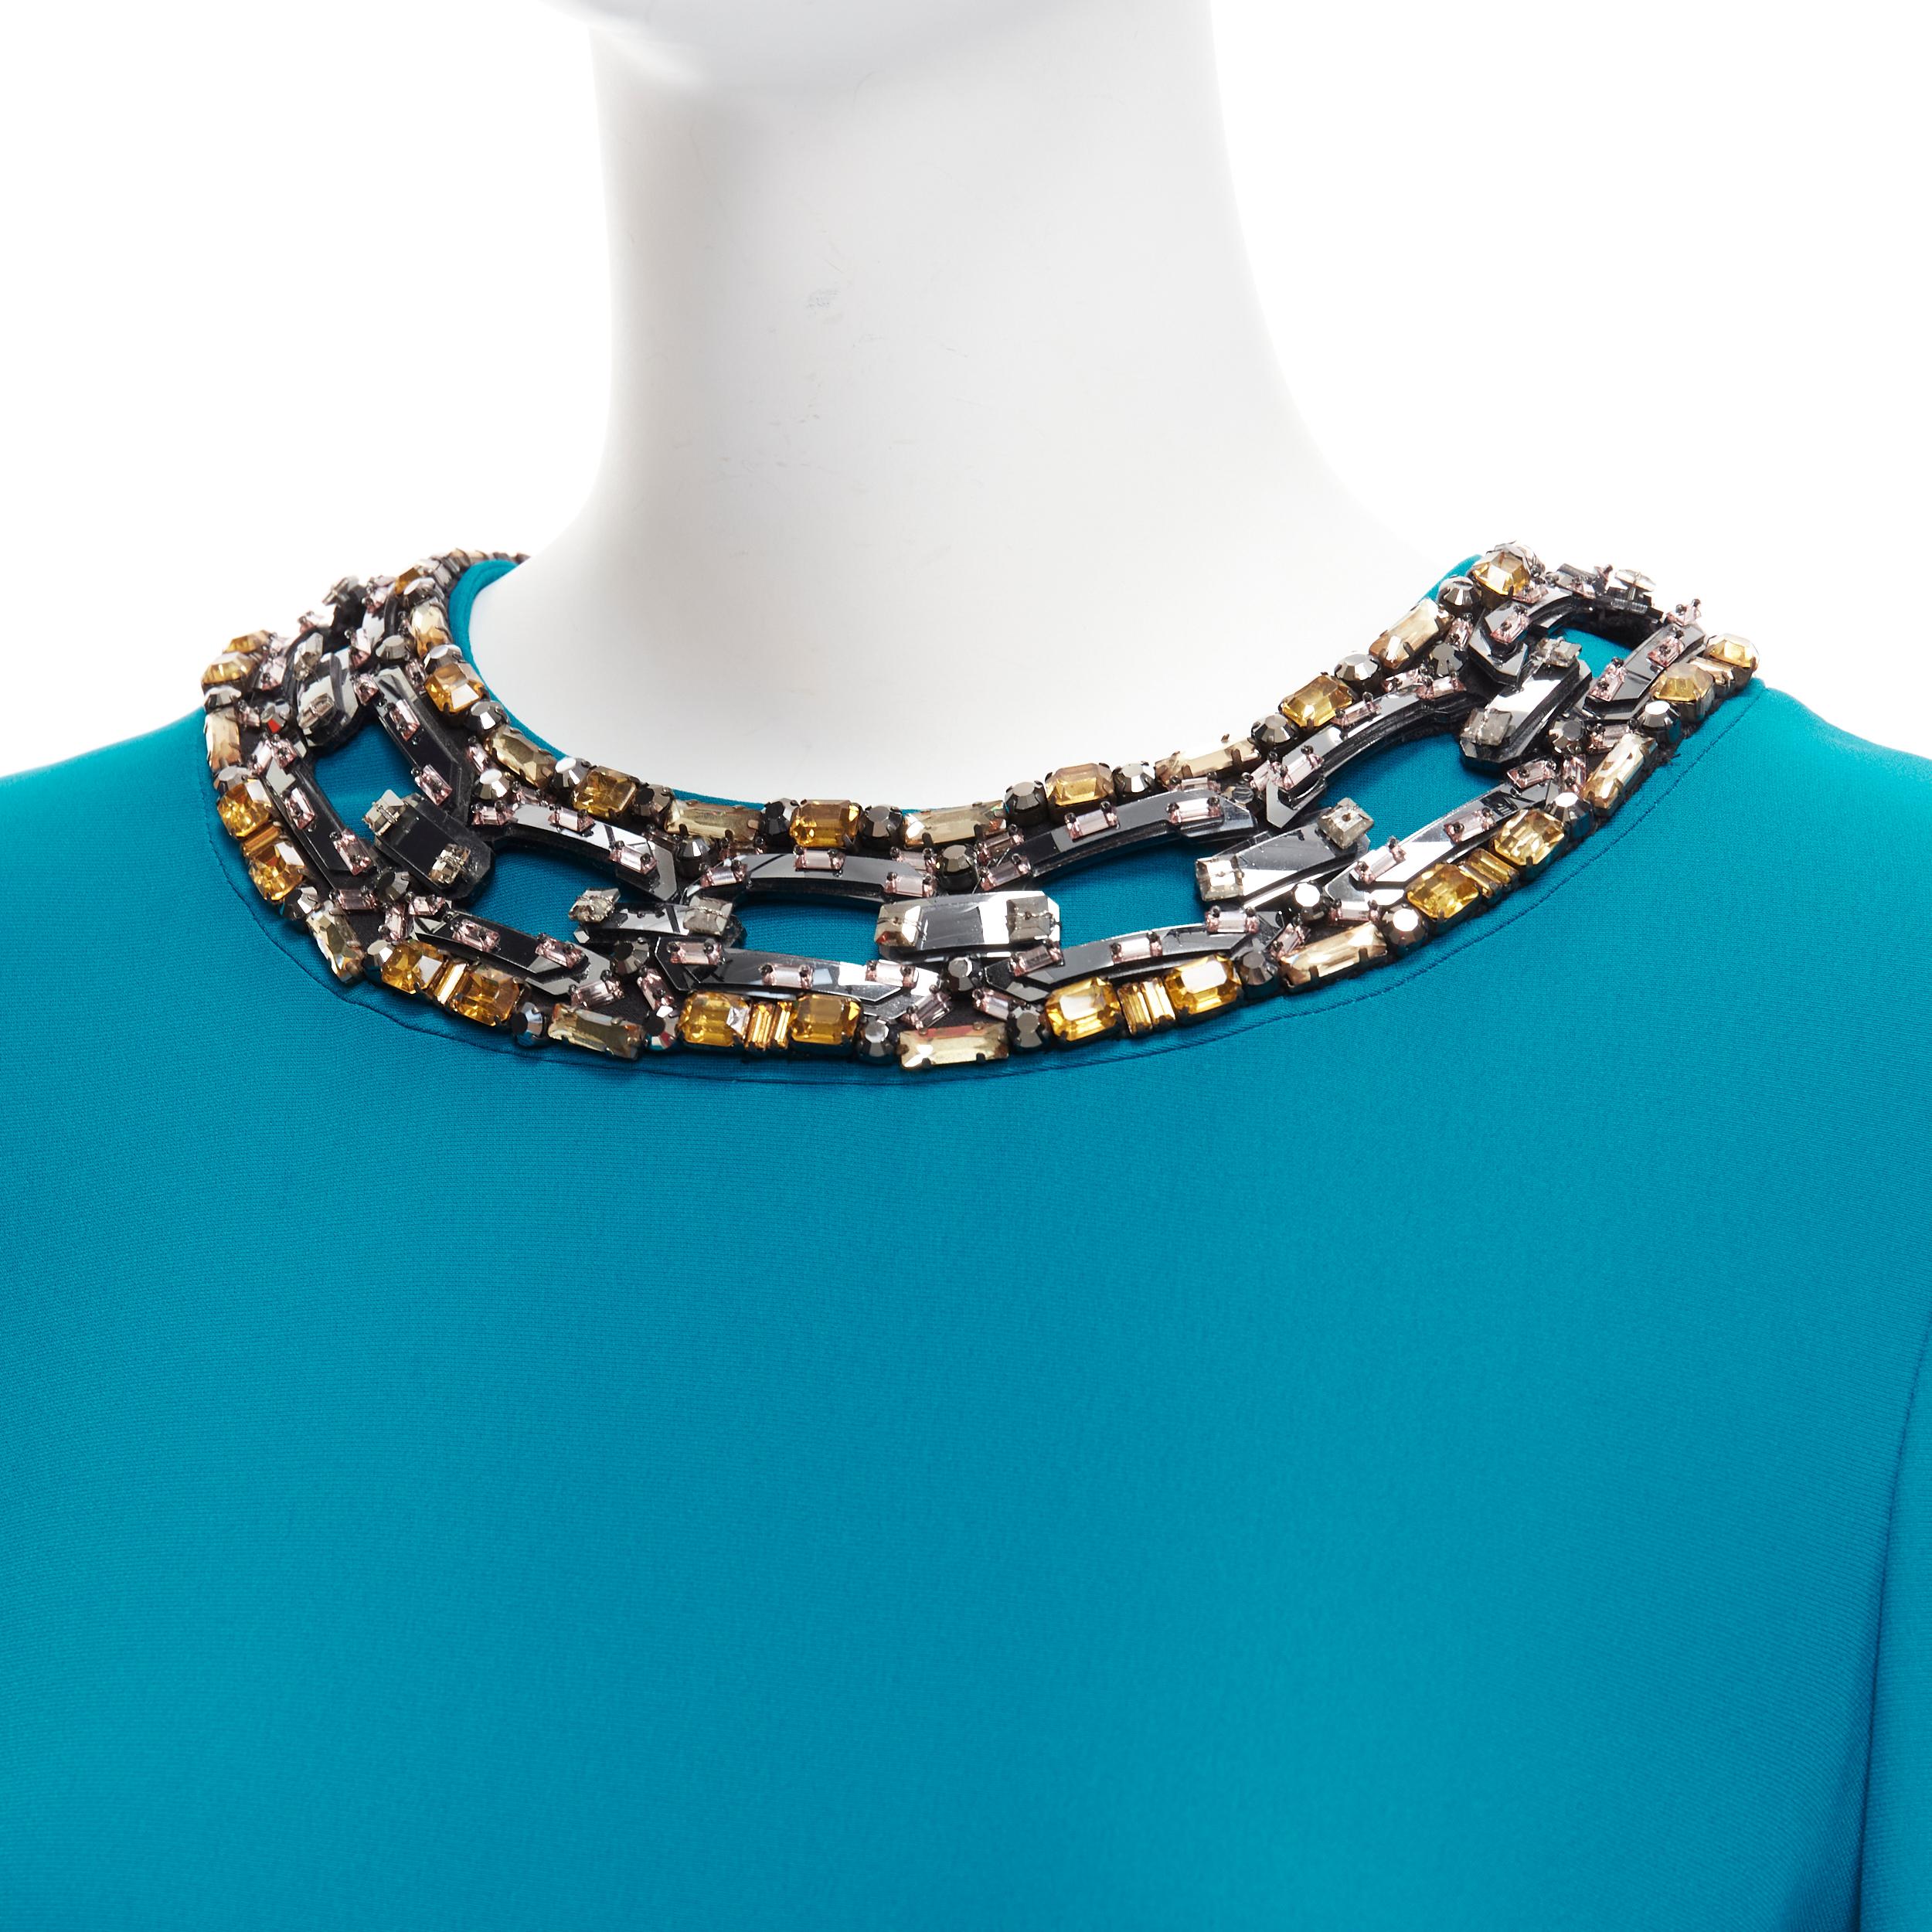 GUCCI teal blueyellow silver crystal chunky chain embellishment shift dress IT40 S
Reference: CC/A00403
Brand: Gucci
Material: Silk
Color: Blue
Pattern: Solid
Closure: Zip
Lining: Blue Fabric
Extra Details: Back zip.
Made in: